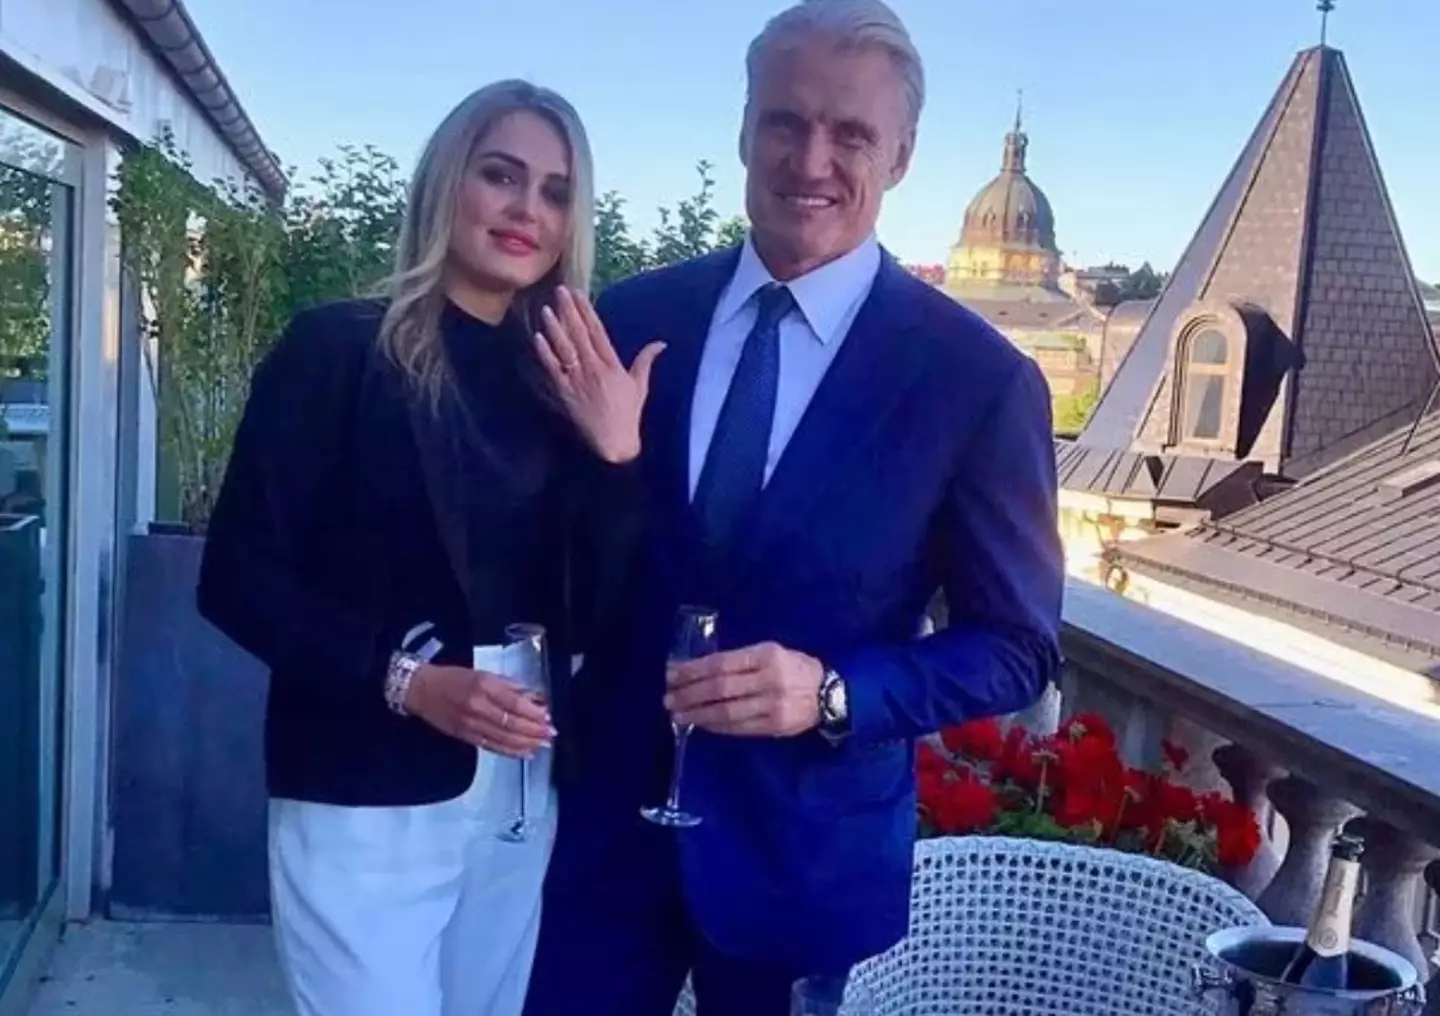 Dolph Lundgren married his girlfriend shortly after admitting he had been given three years to live.